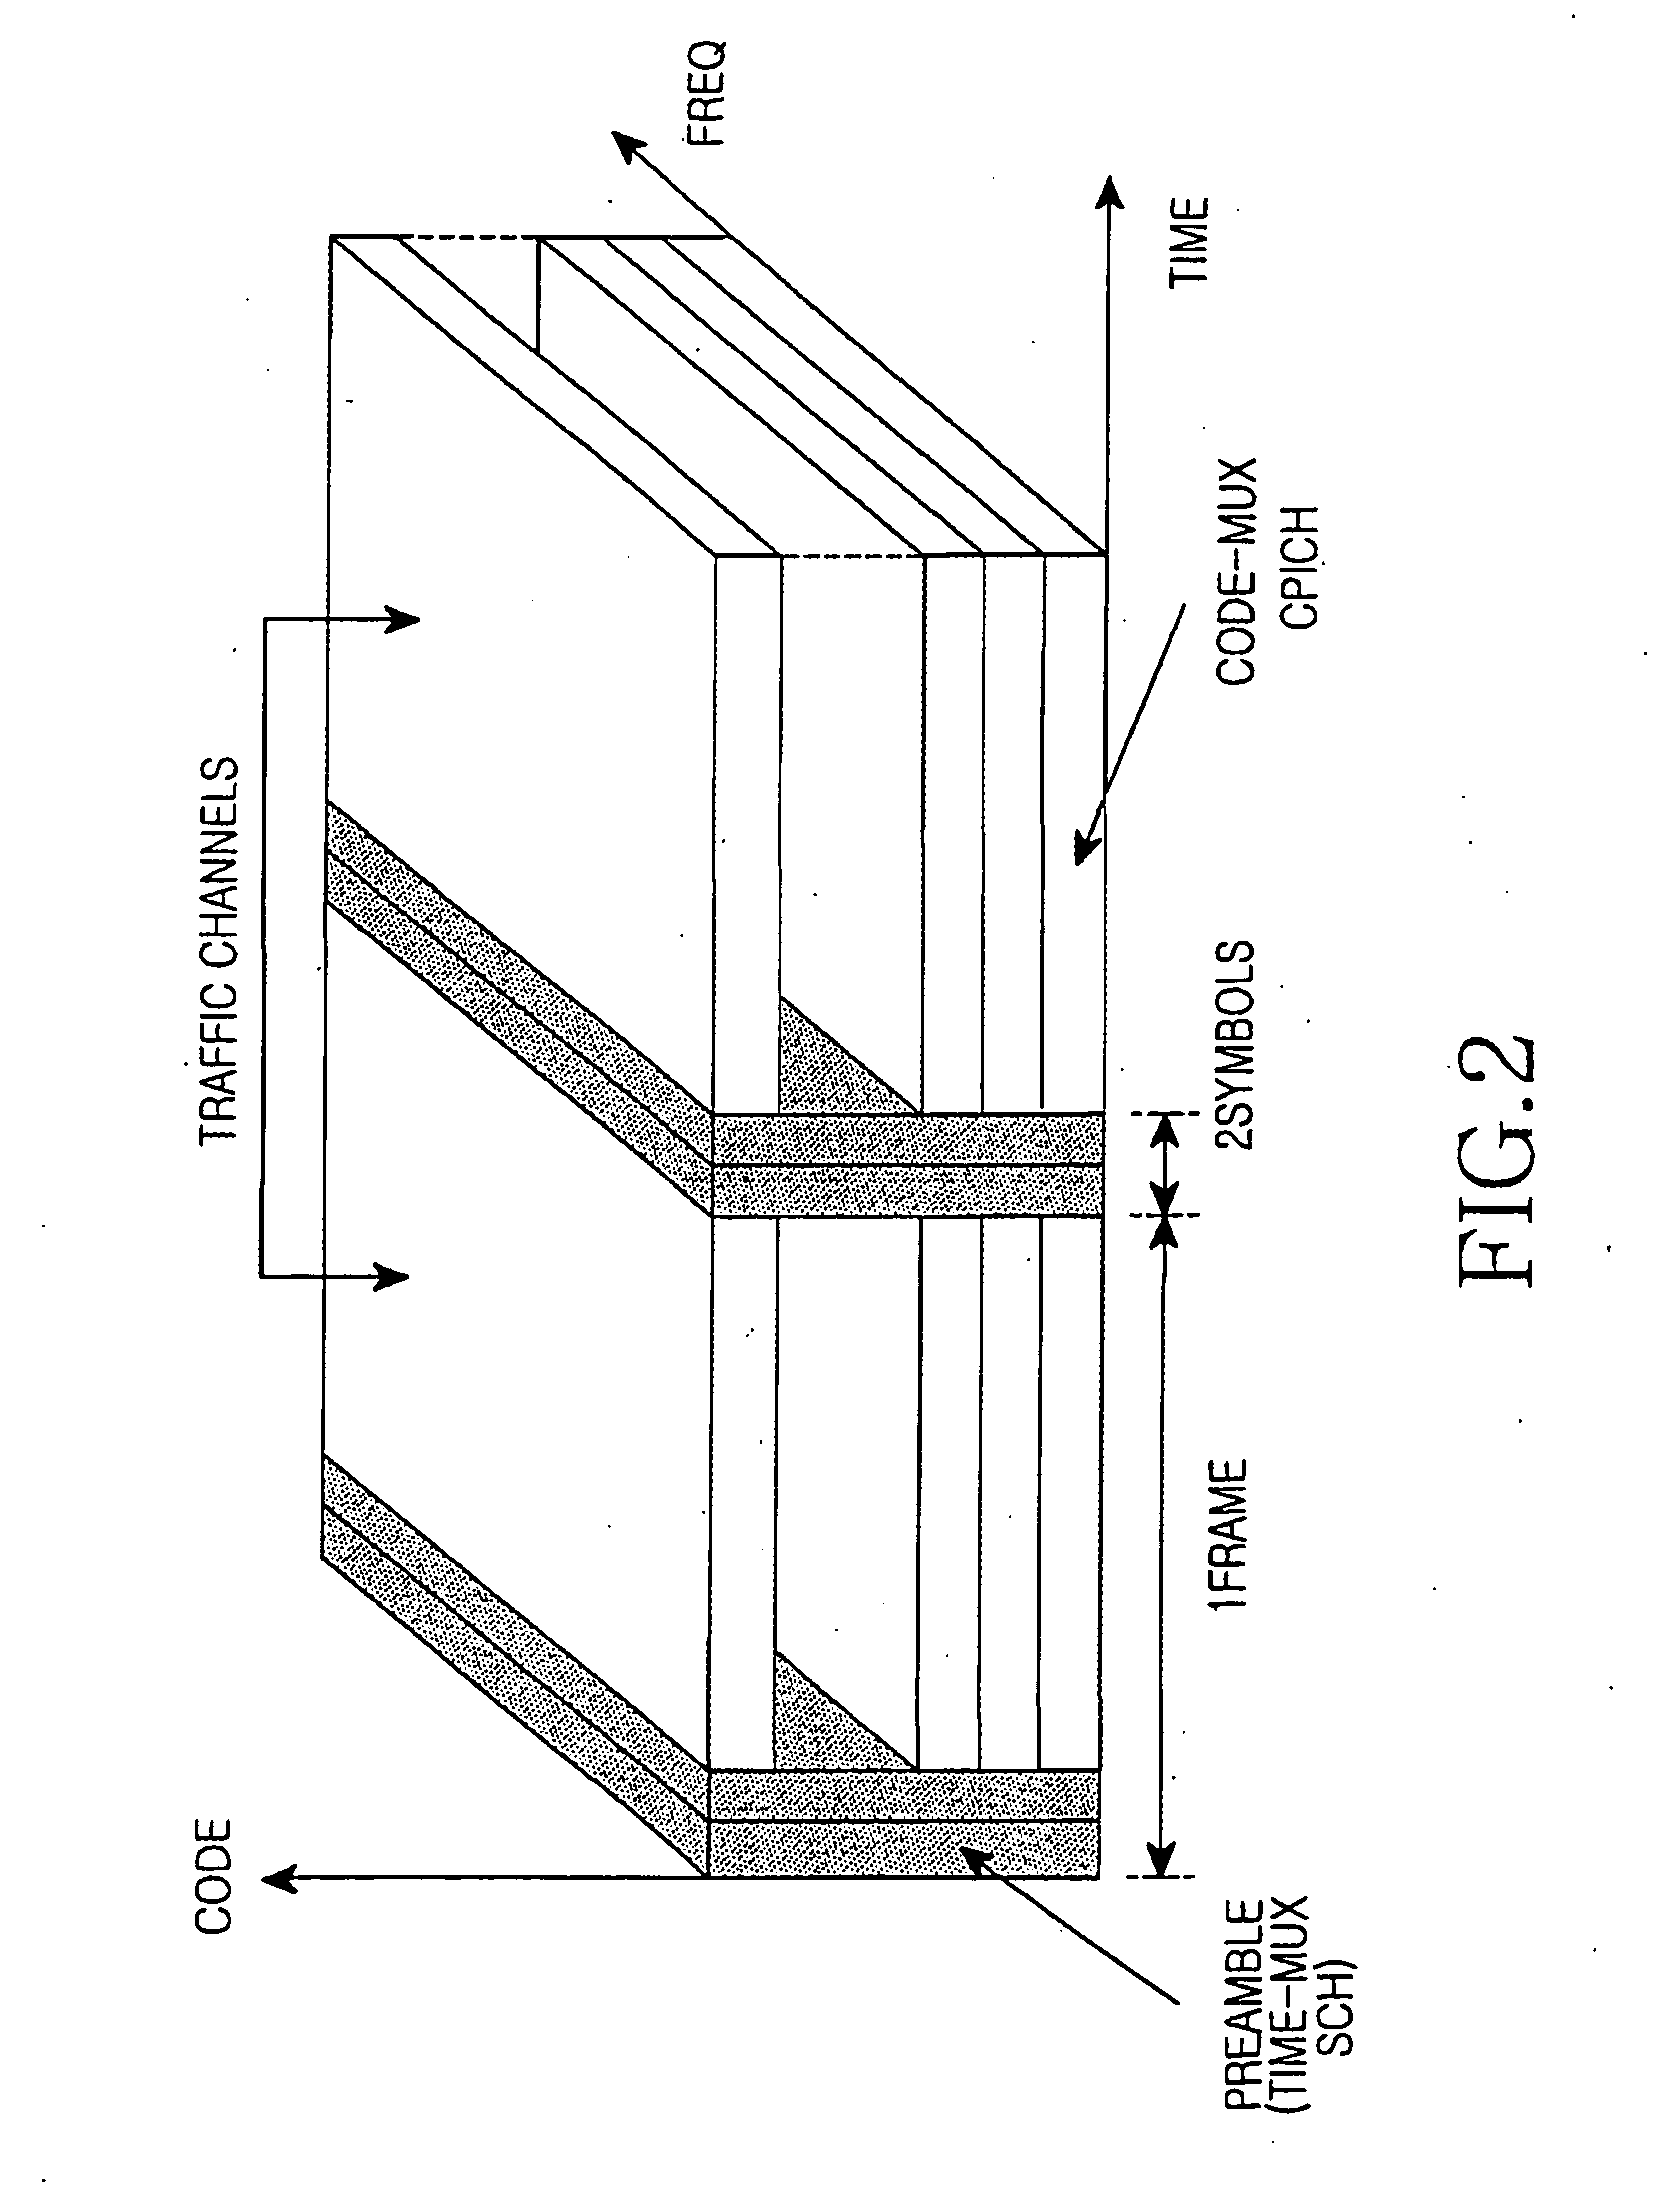 Transmitting/receiving apparatus and method for cell search in a broadband wireless communications system